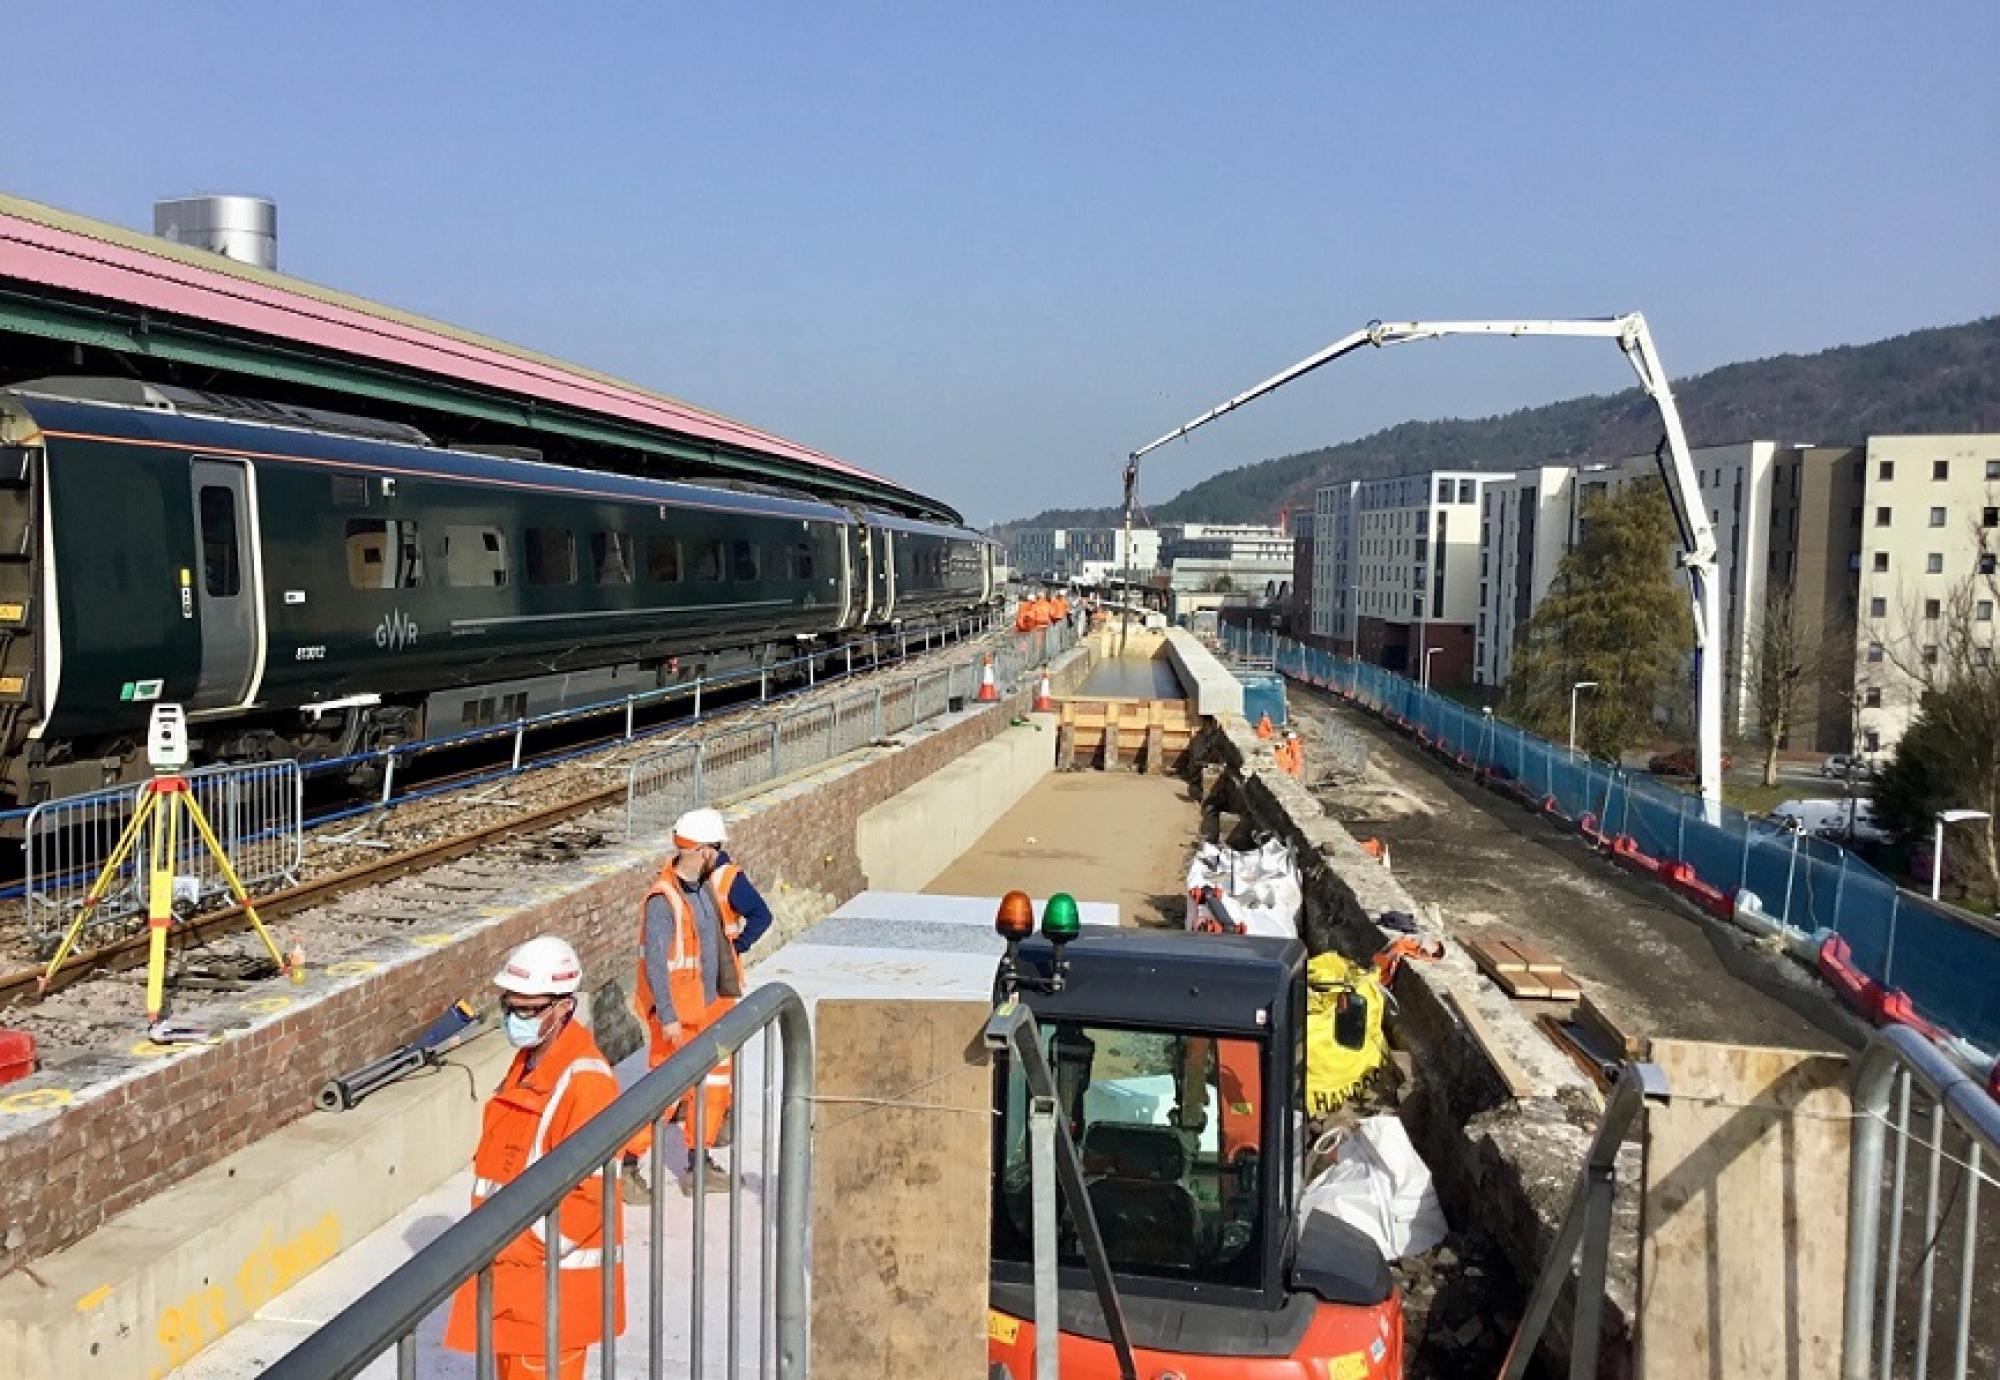 Work being carried out on Platform 4 at Swansea railway station